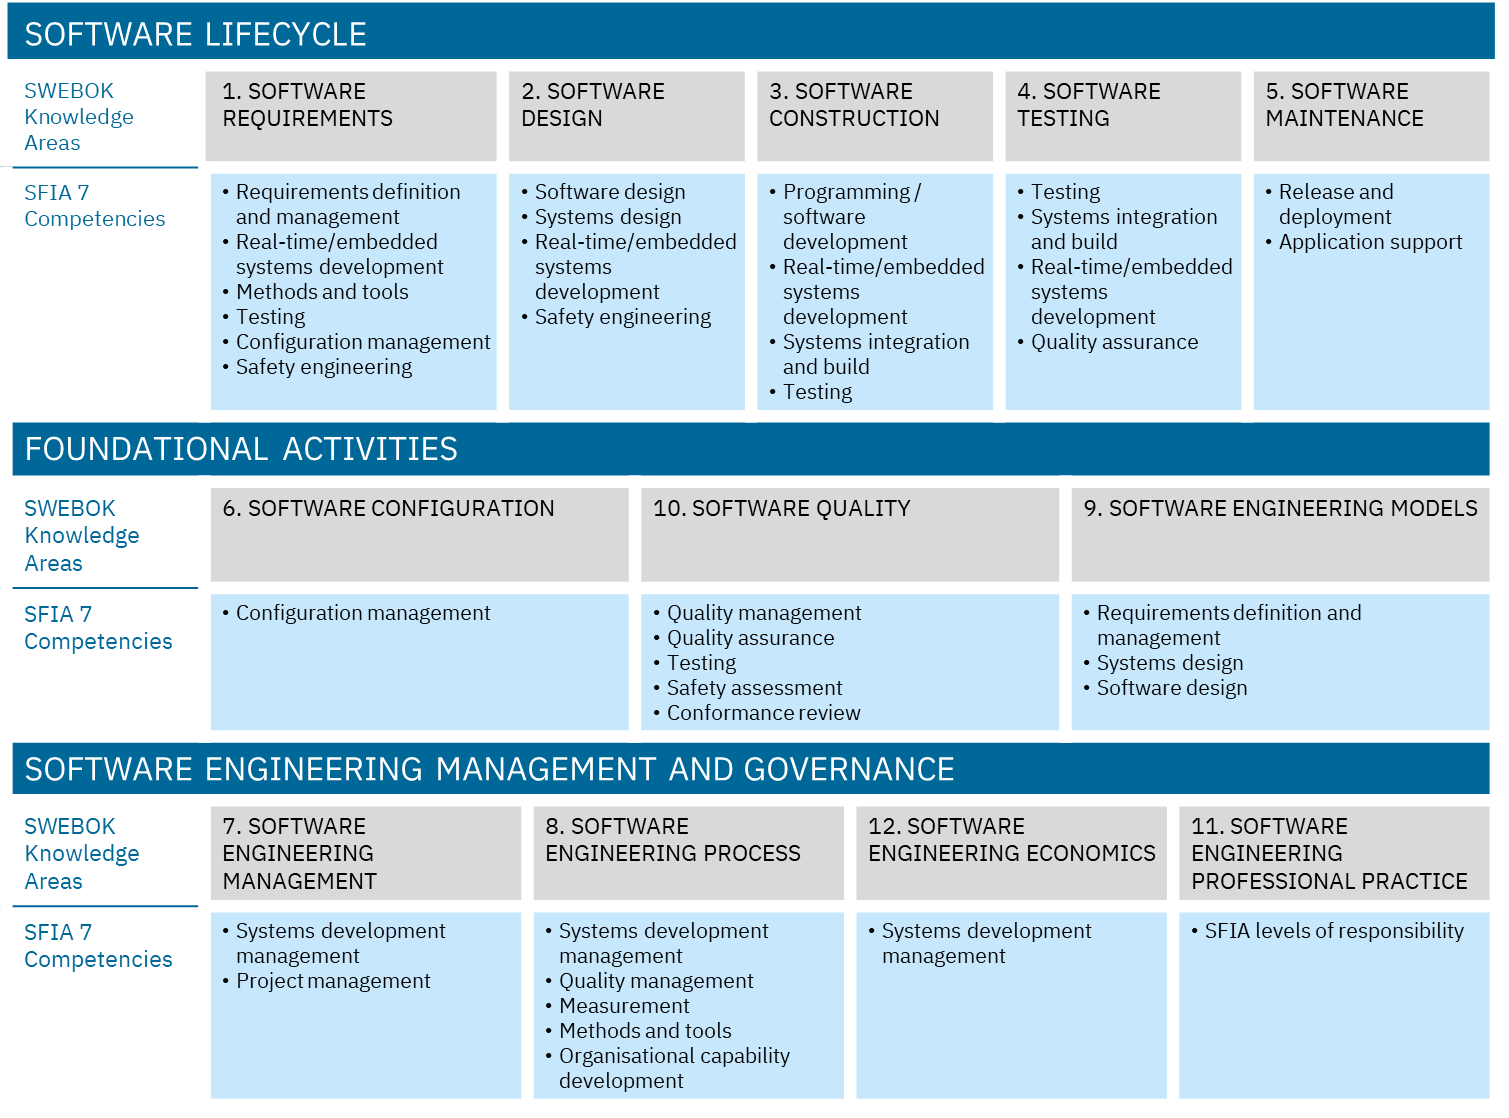 Mapping software engineering competencies to knowledge areas.png